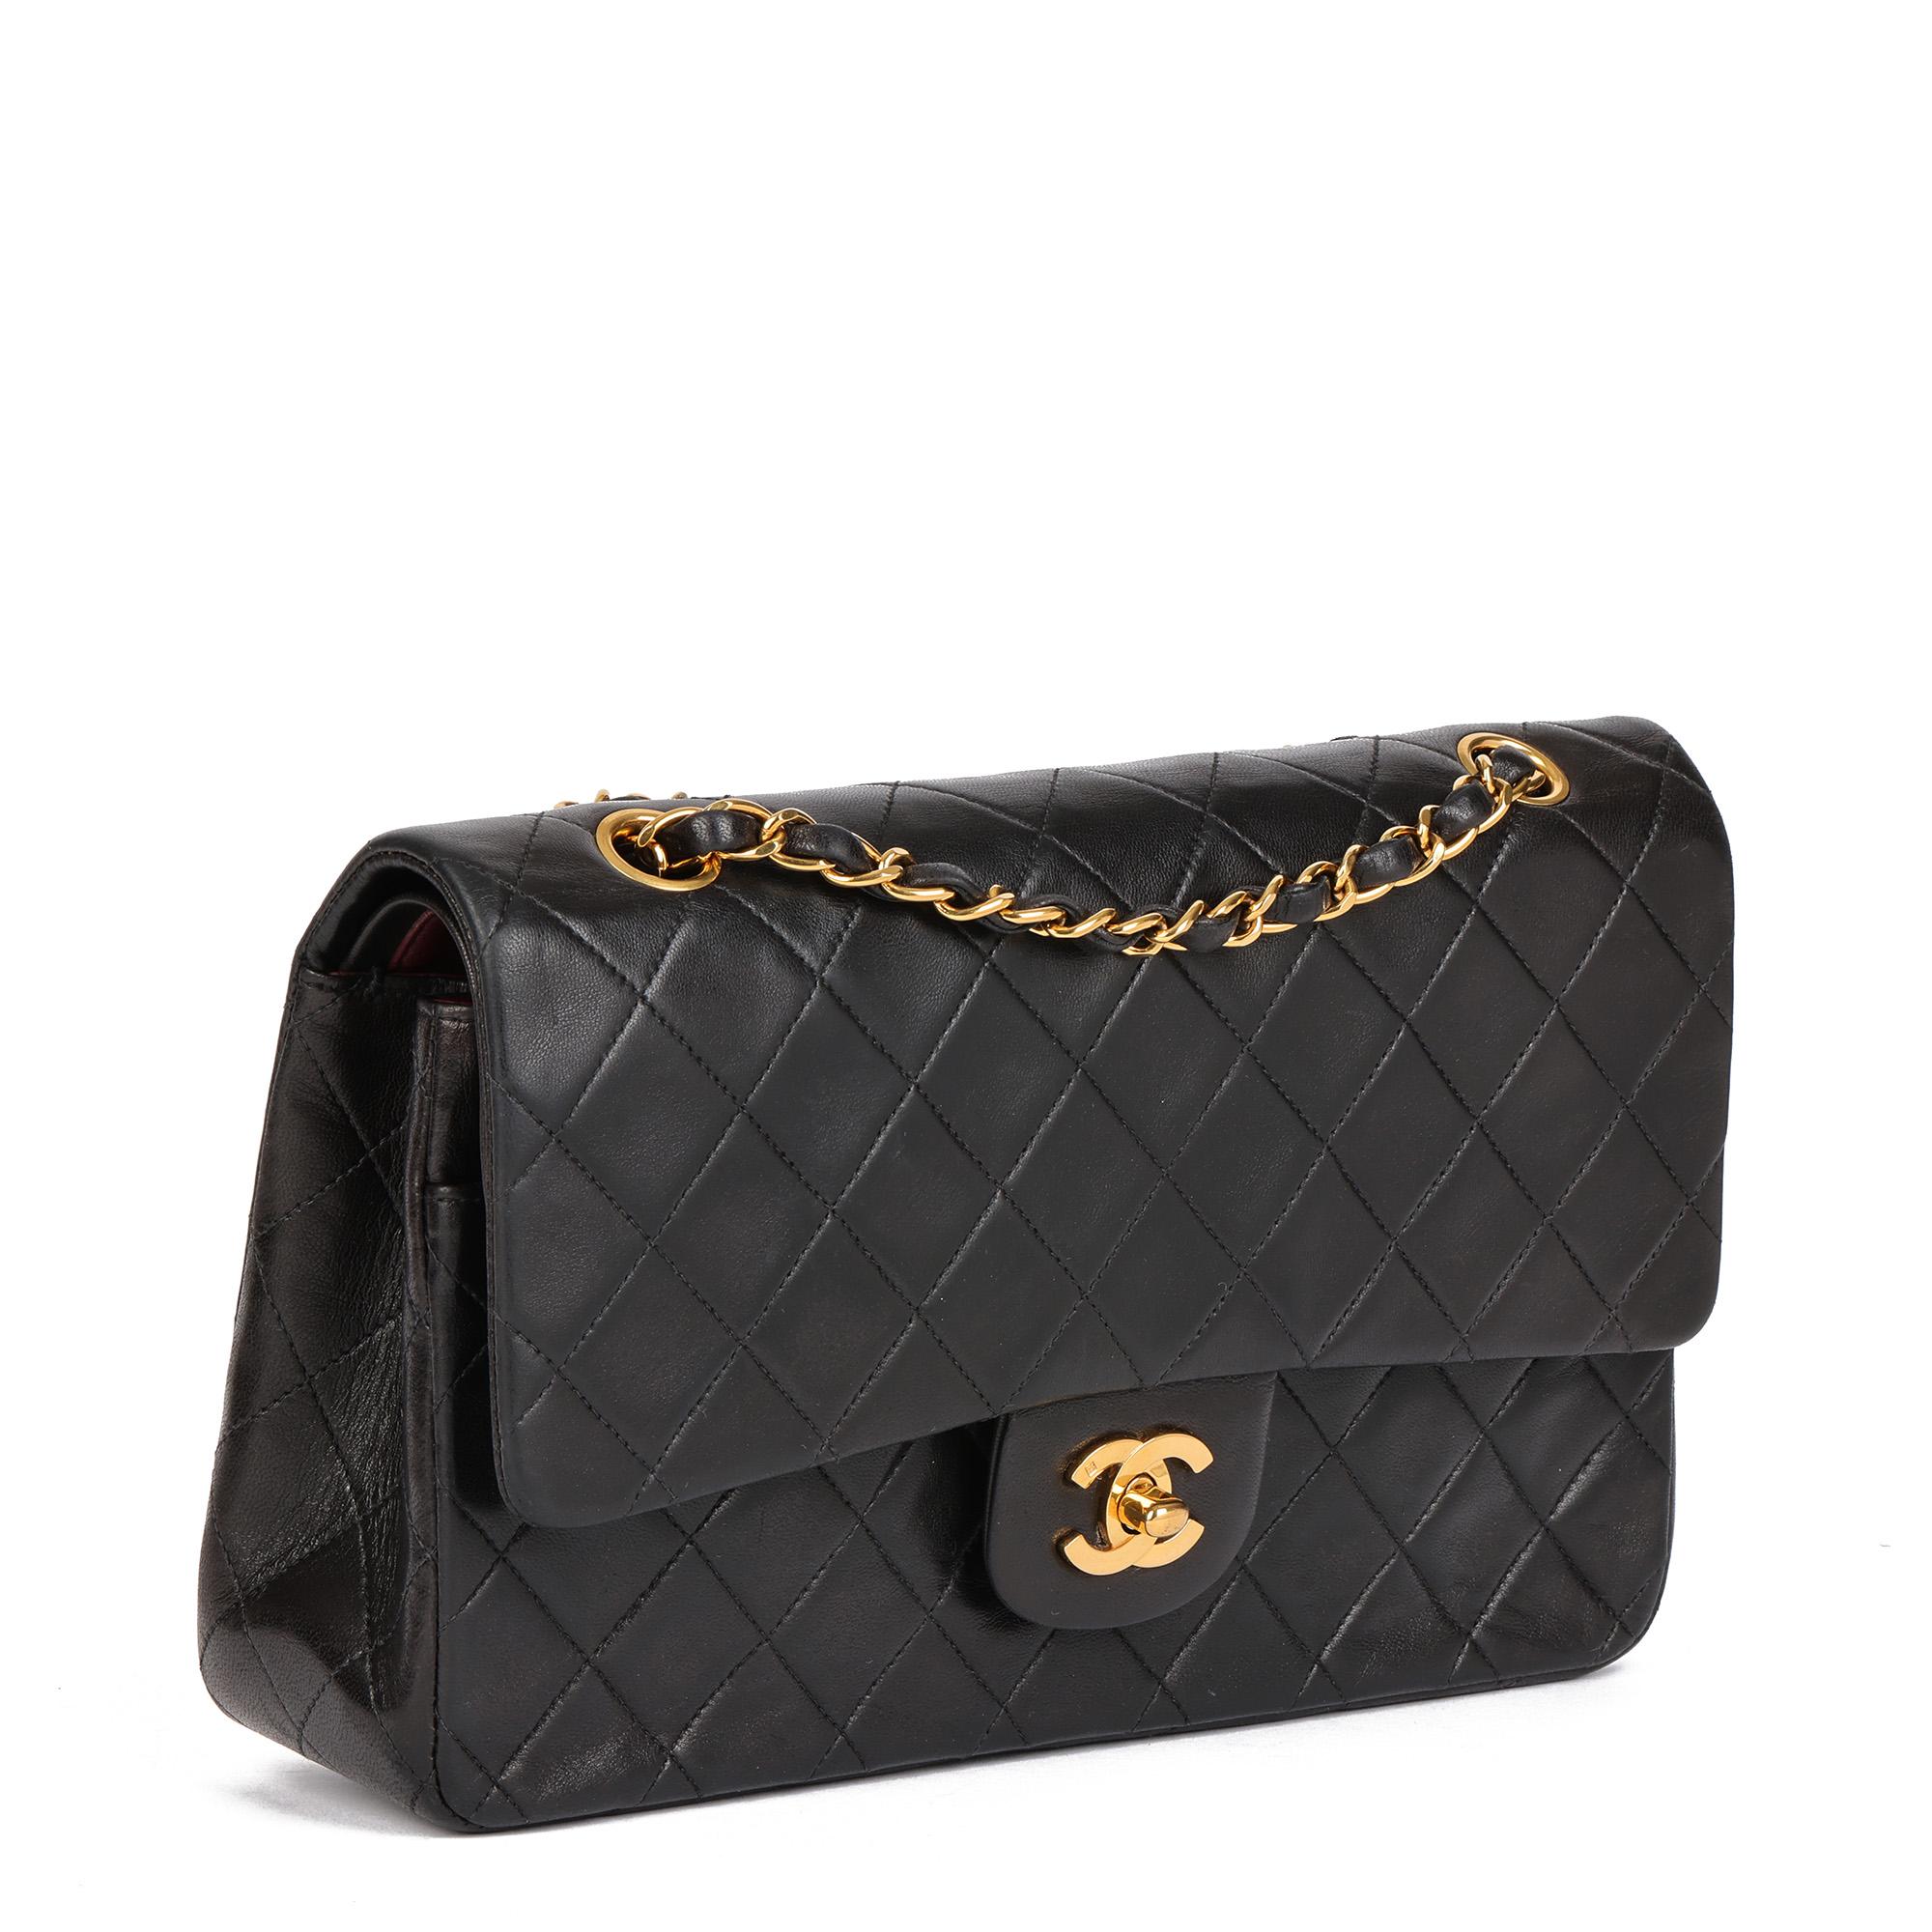 Chanel BLACK QUILTED LAMBSKIN VINTAGE MEDIUM CLASSIC DOUBLE FLAP BAG

CONDITION NOTES
The exterior is in excellent condition with light signs of use.
The interior is in excellent condition with light signs of use.
The hardware is in excellent